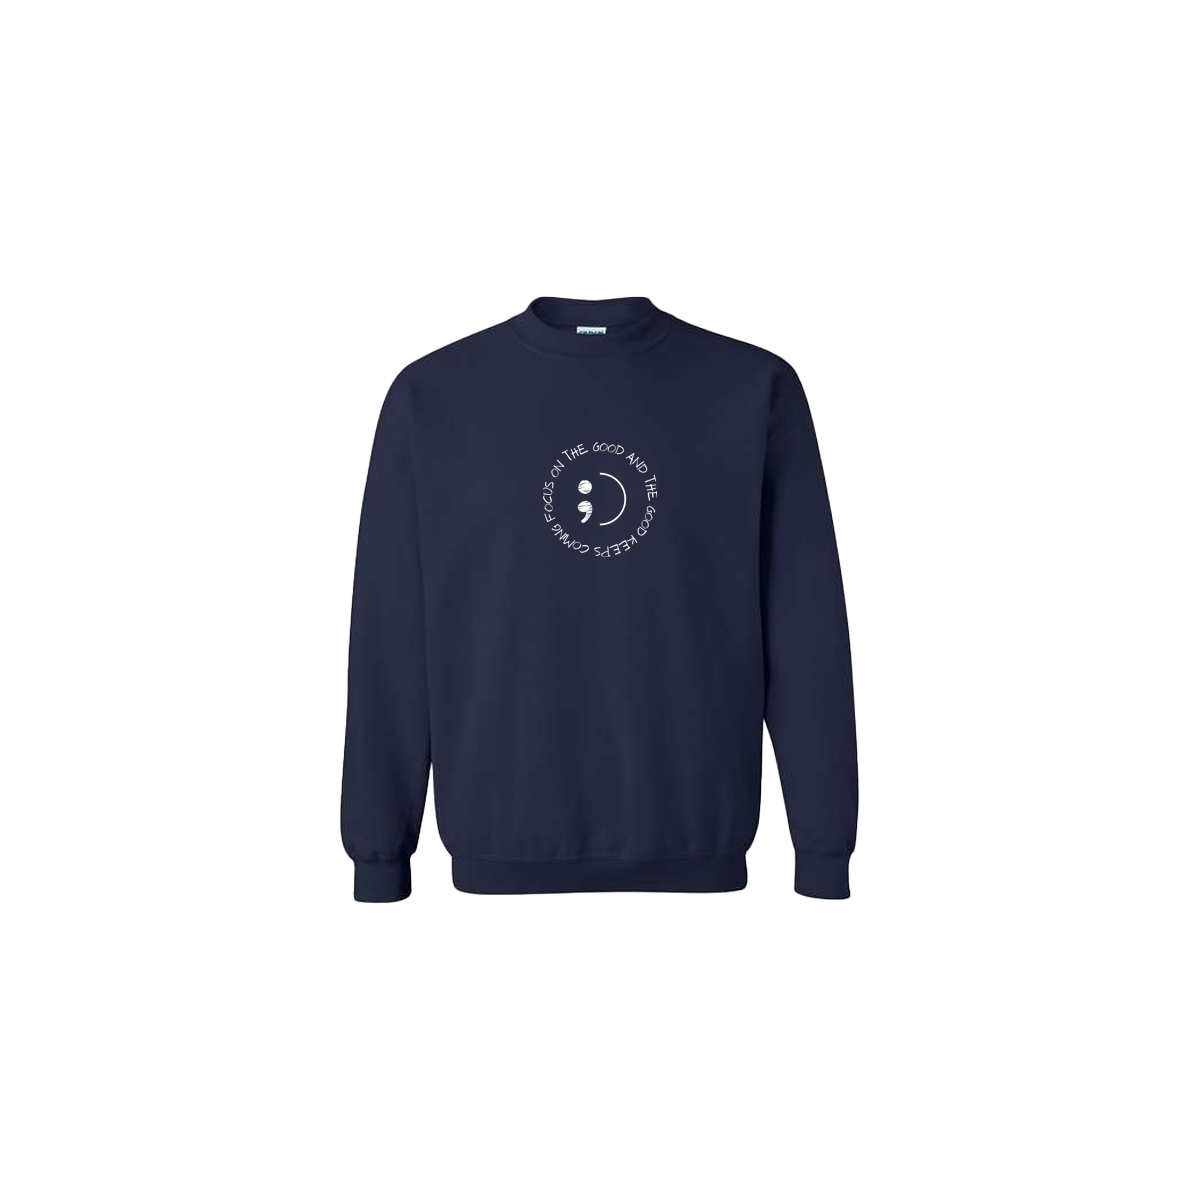 Focus on The Good And The Good Keeps Coming Embroidered Navy Blue Crewneck - Mental Health Awareness Clothing